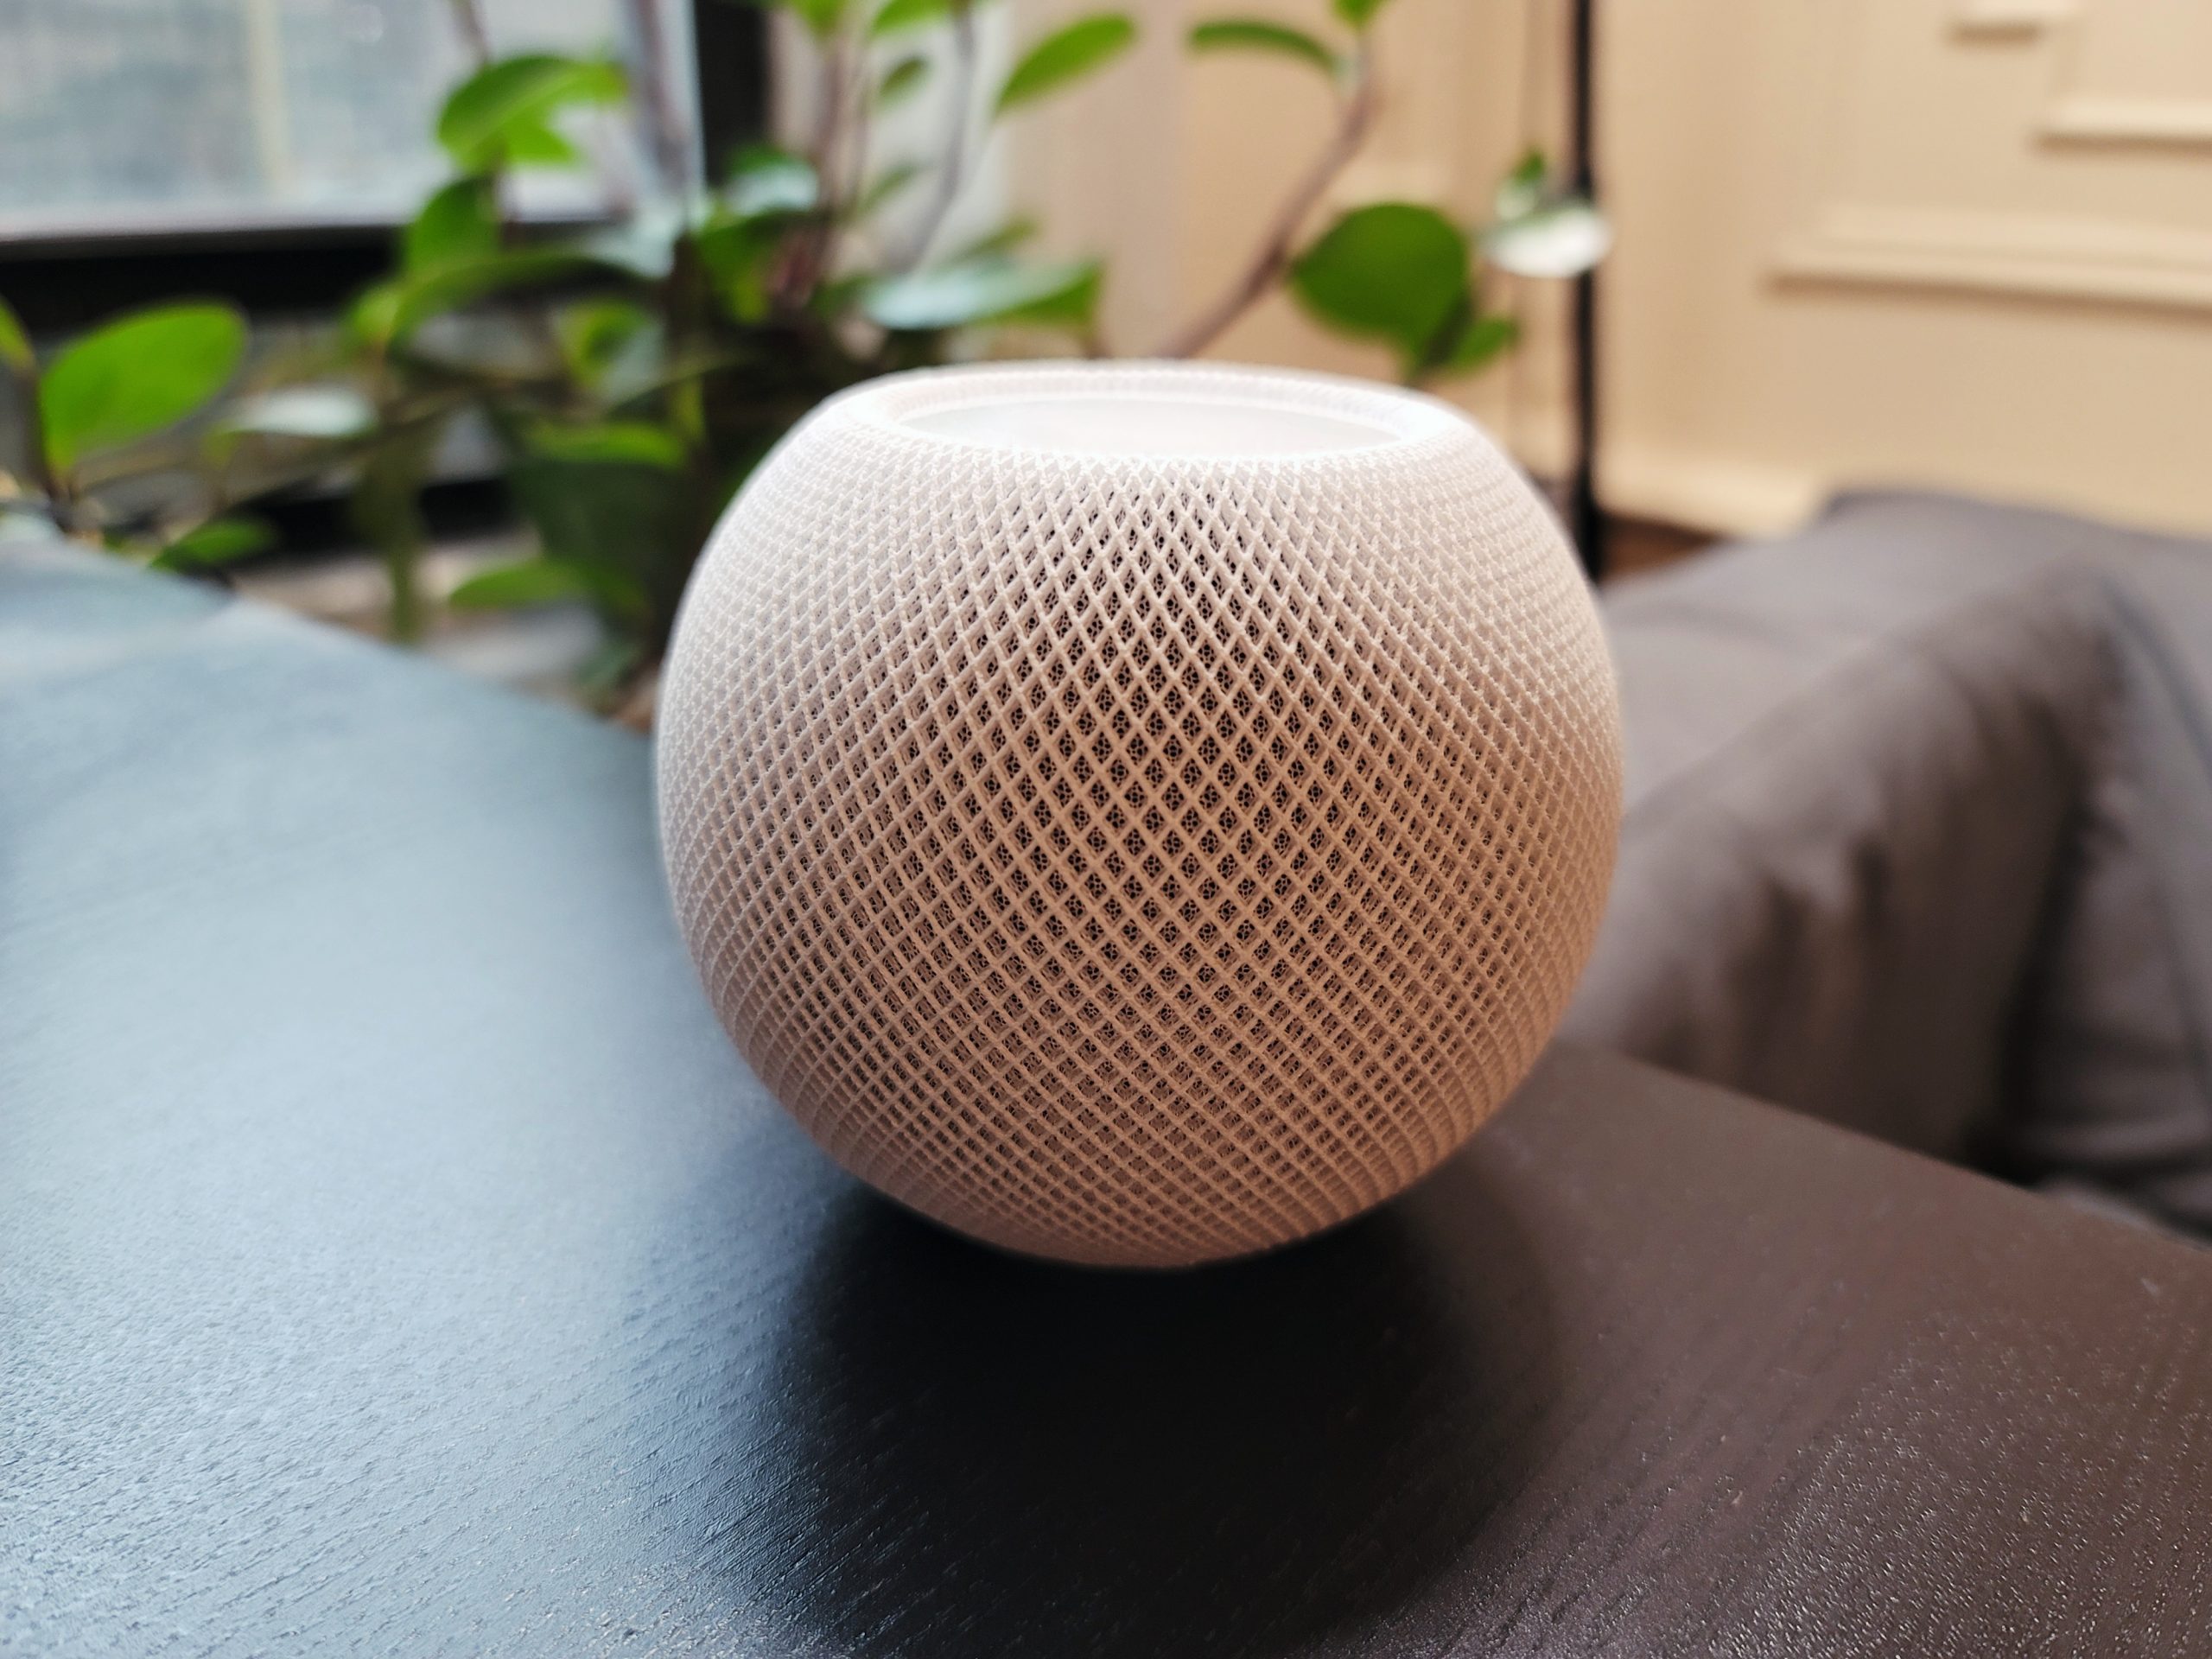 What Gadget Christmas Special- Apple Homepod Mini